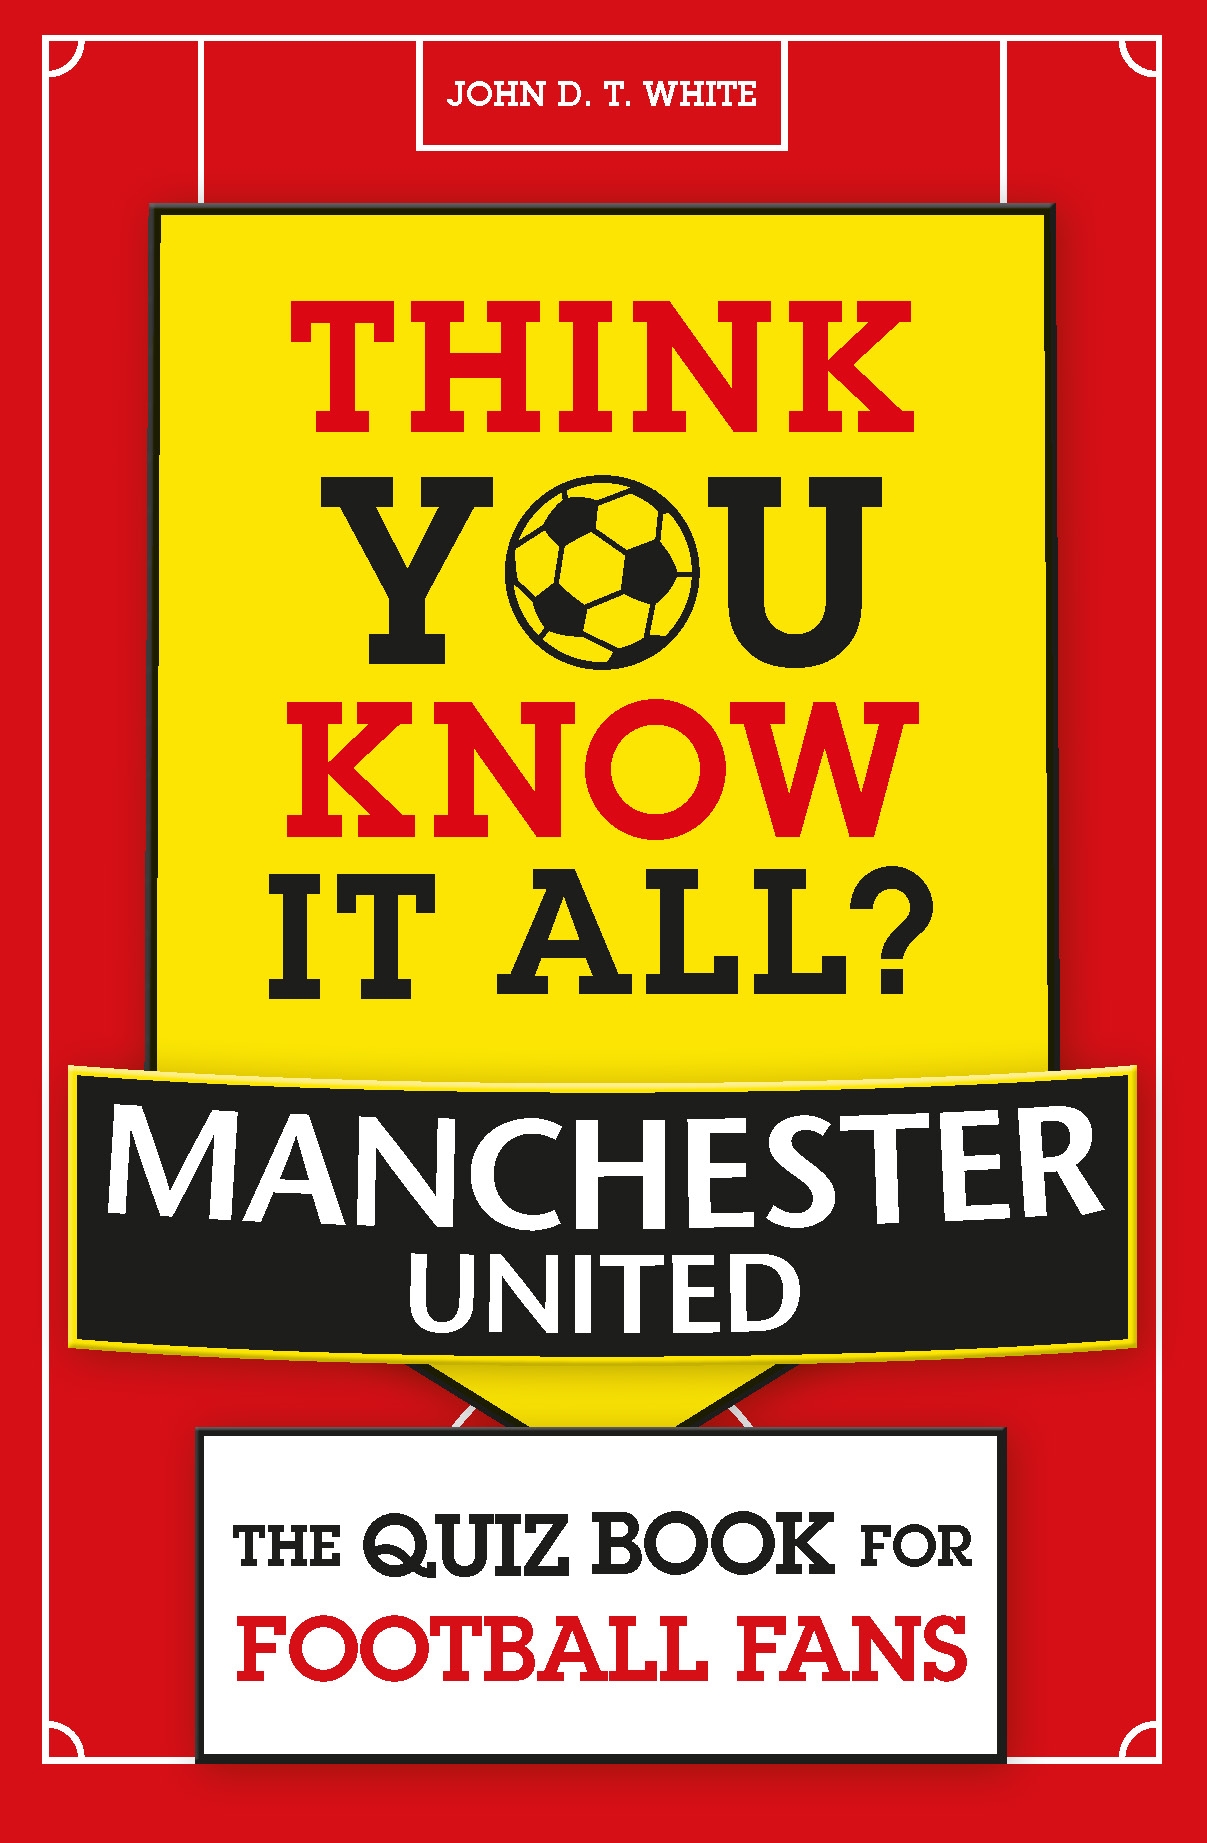 Think You Know It All? Manchester United